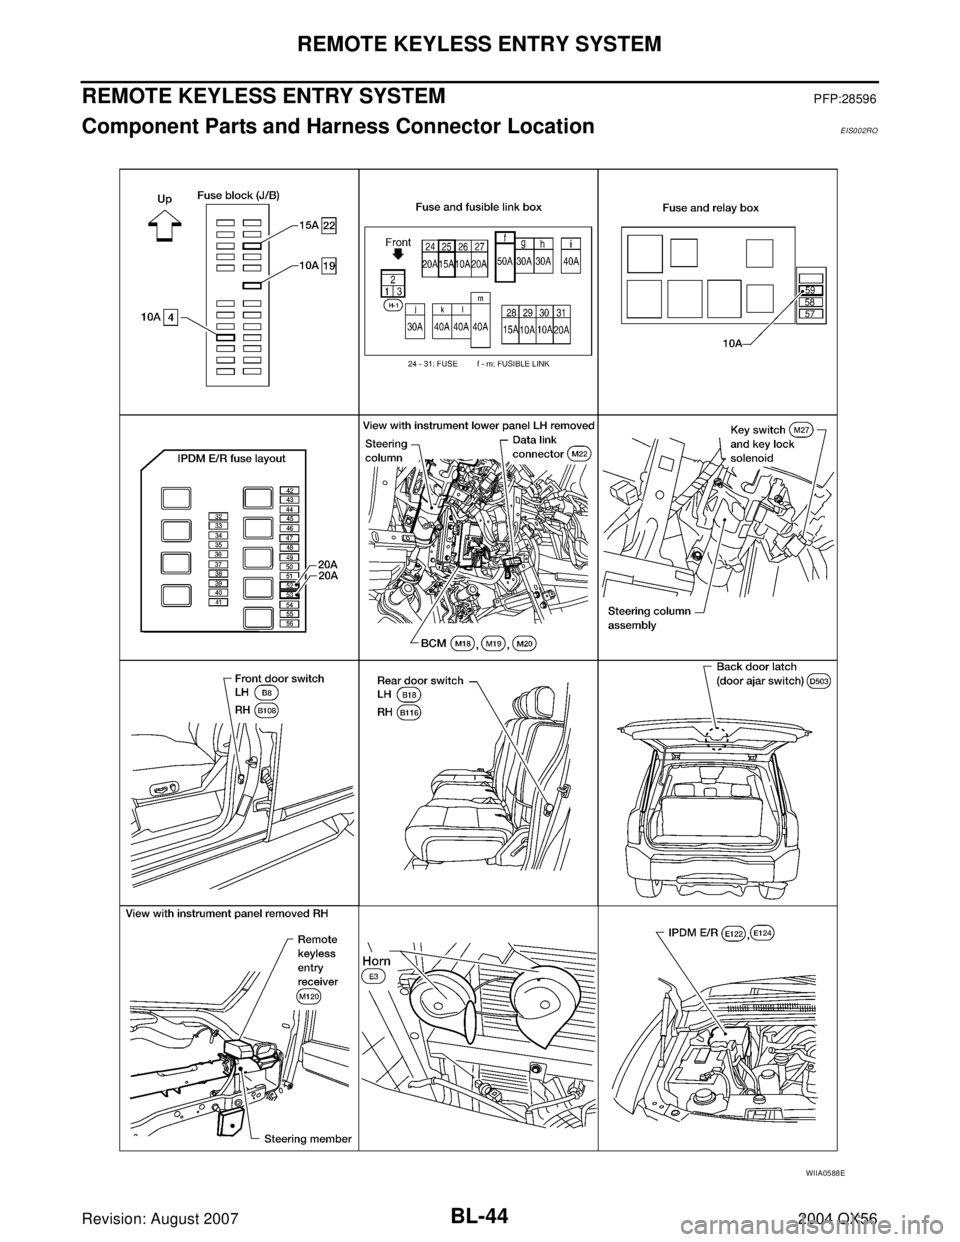 INFINITI QX56 2004  Factory Service Manual BL-44
REMOTE KEYLESS ENTRY SYSTEM
Revision: August 20072004 QX56
REMOTE KEYLESS ENTRY SYSTEMPFP:28596
Component Parts and Harness Connector LocationEIS002RO
WIIA0588E 